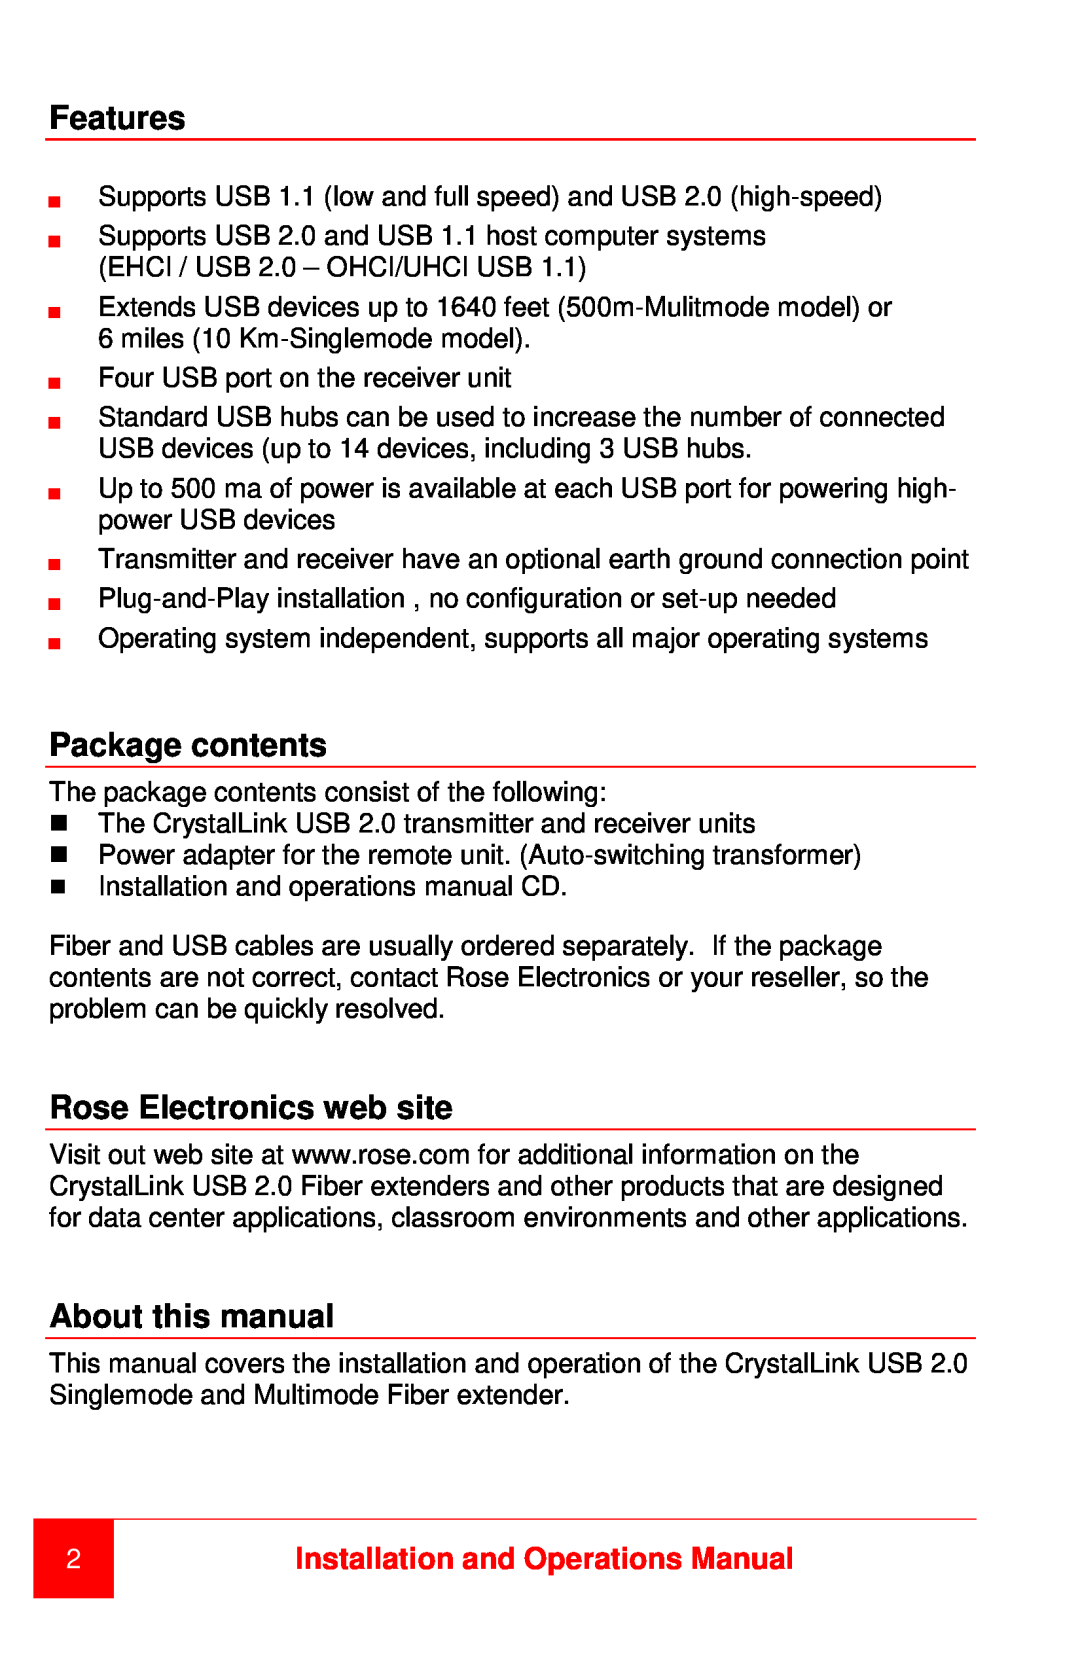 Rose electronic CLK-4U2FS-10KM, CLK-4U2FM-500M Features, Package contents, Rose Electronics web site, About this manual 